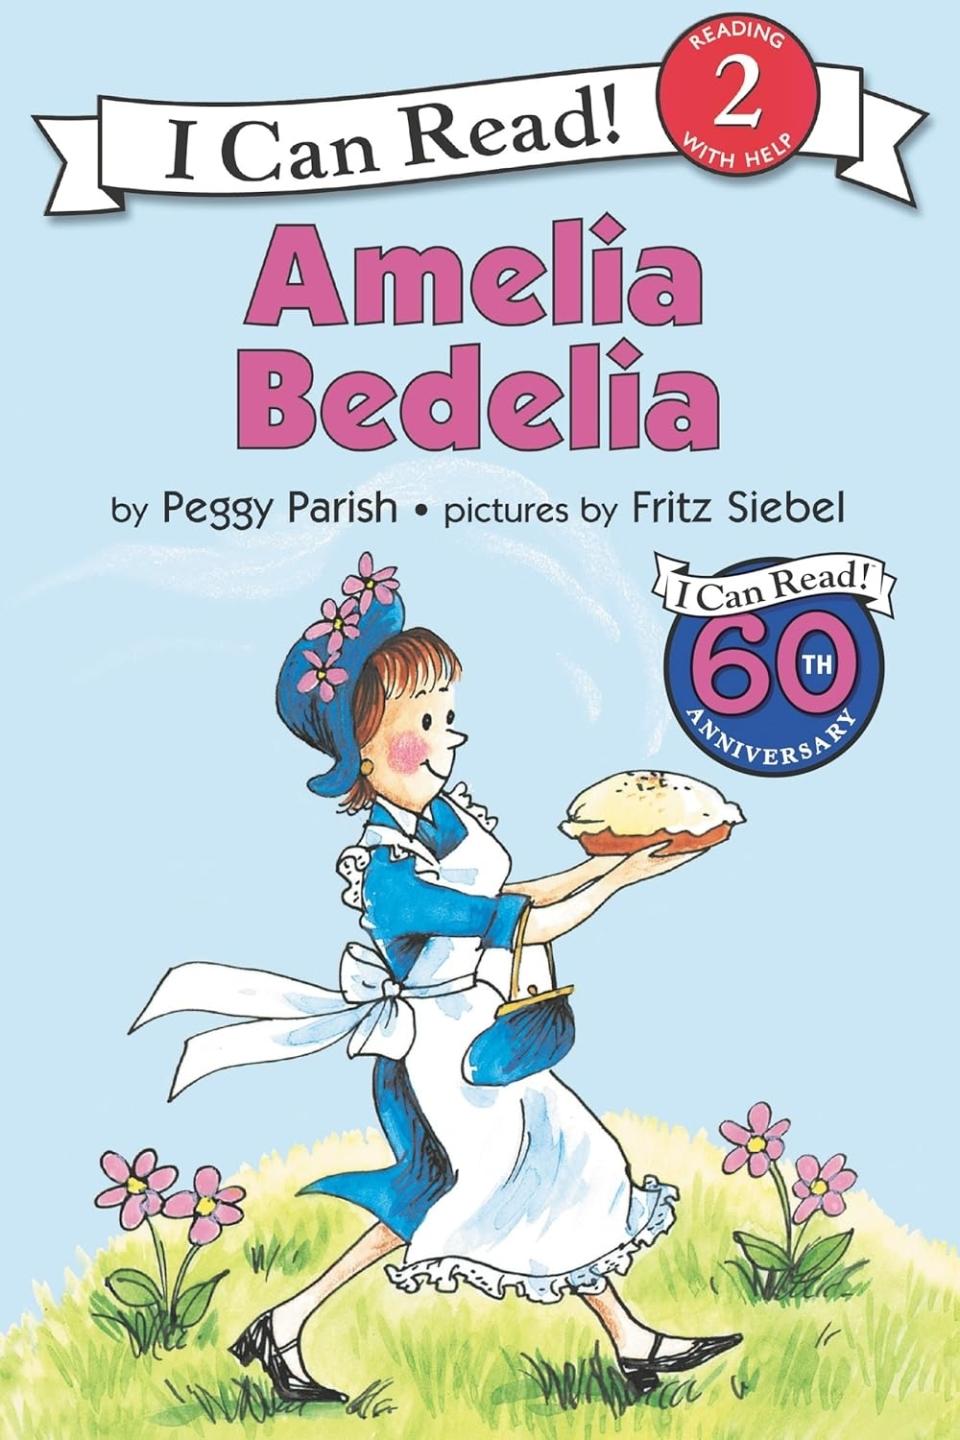 Book cover of "Amelia Bedelia" showing the character holding a pie, with text for author and illustrative credits